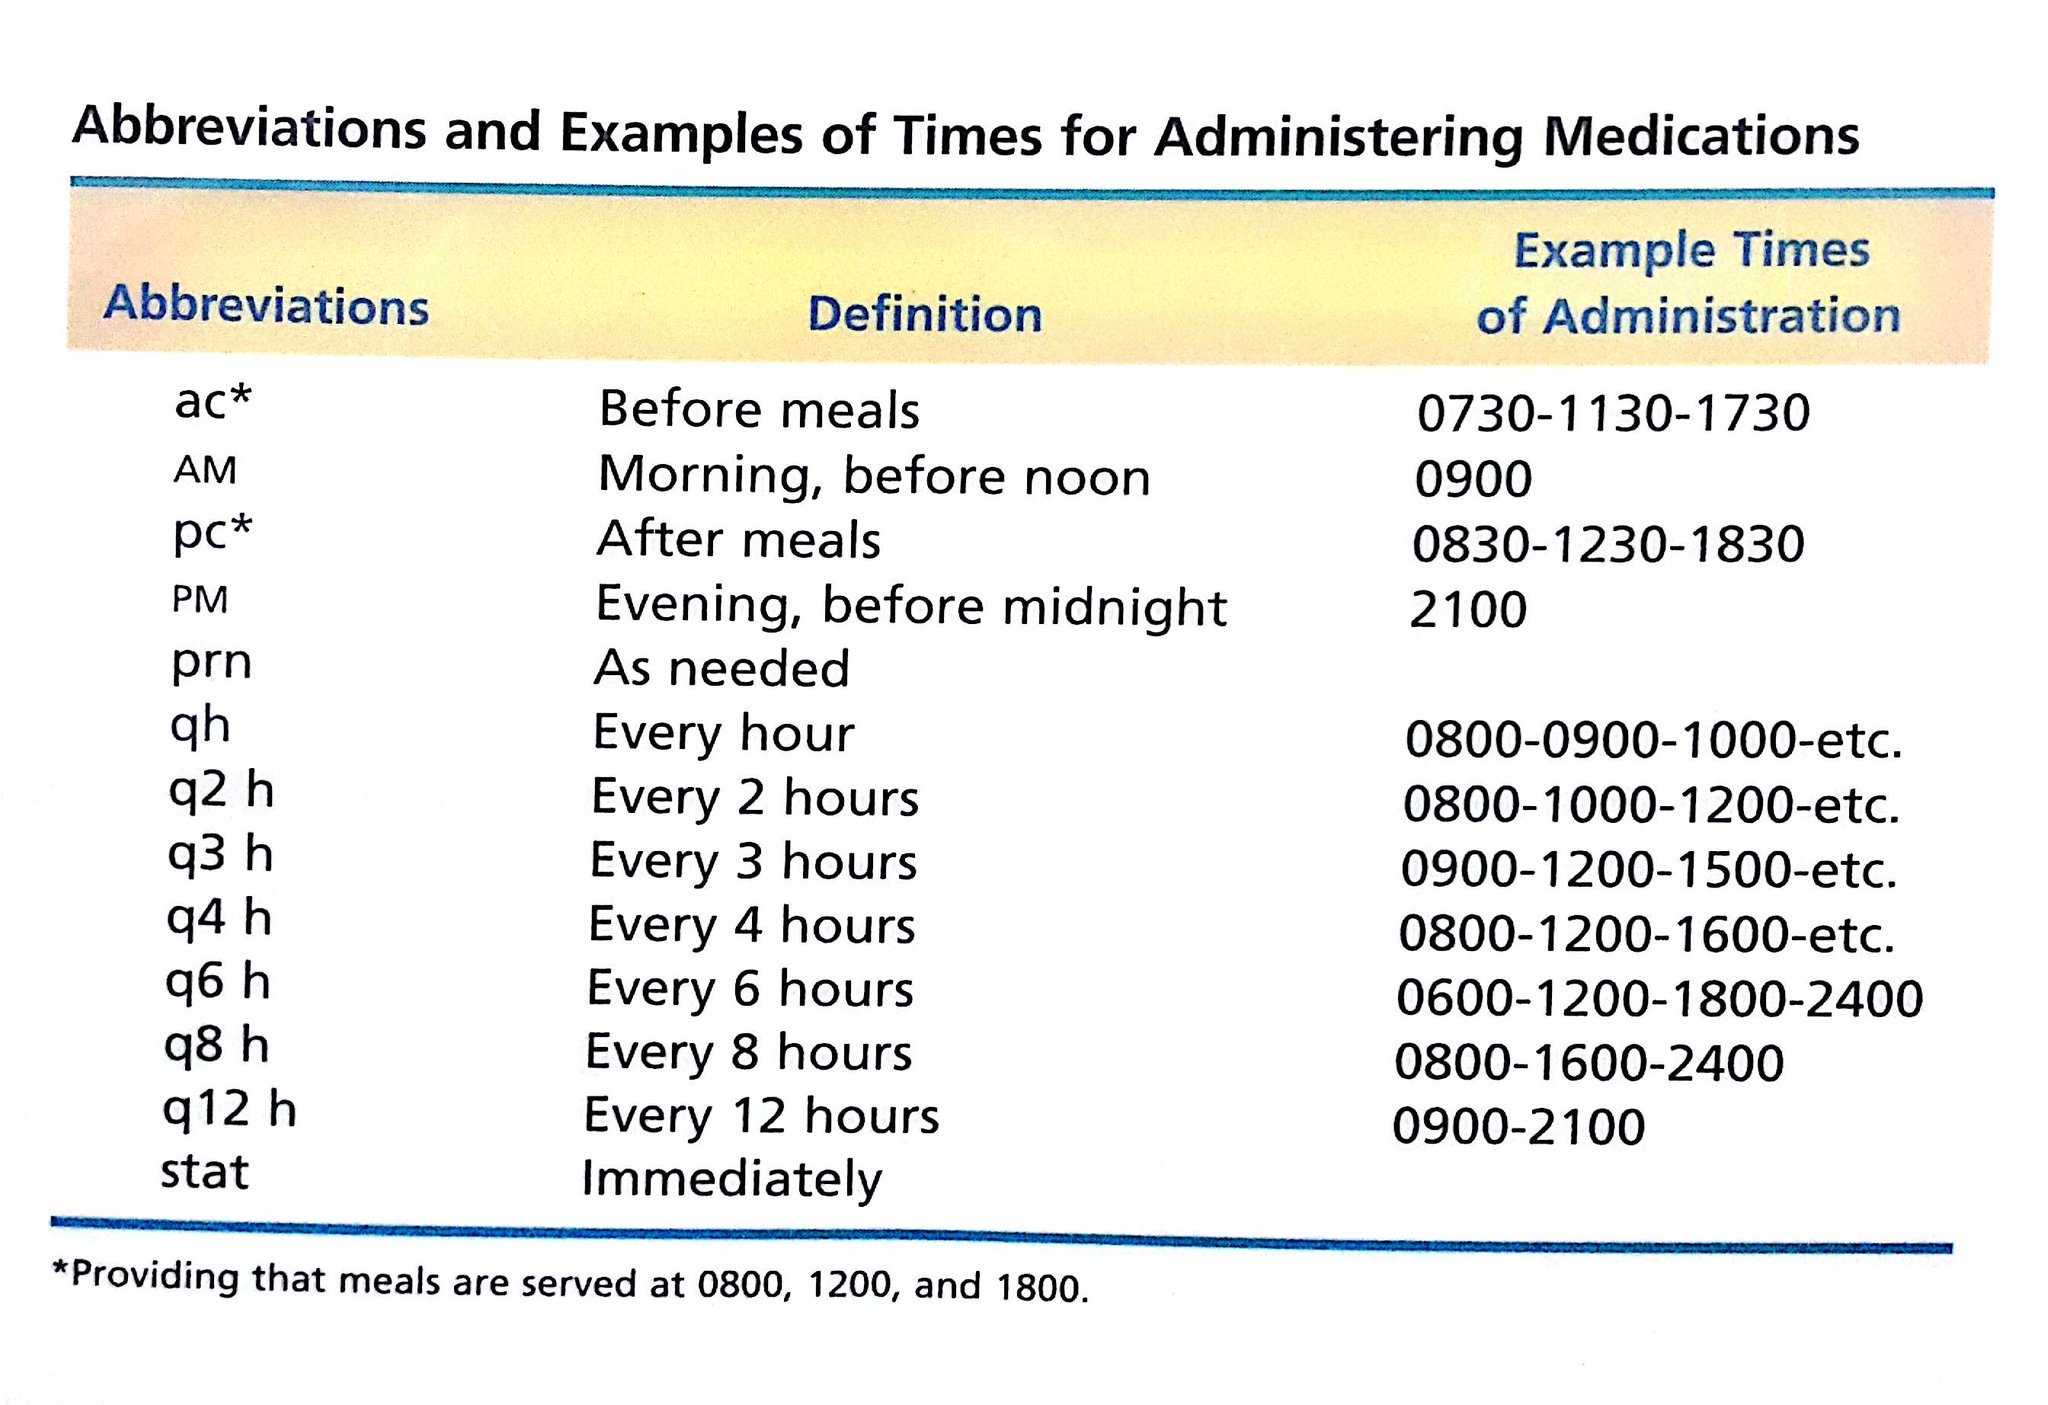 What does STAT mean? Medication meaning